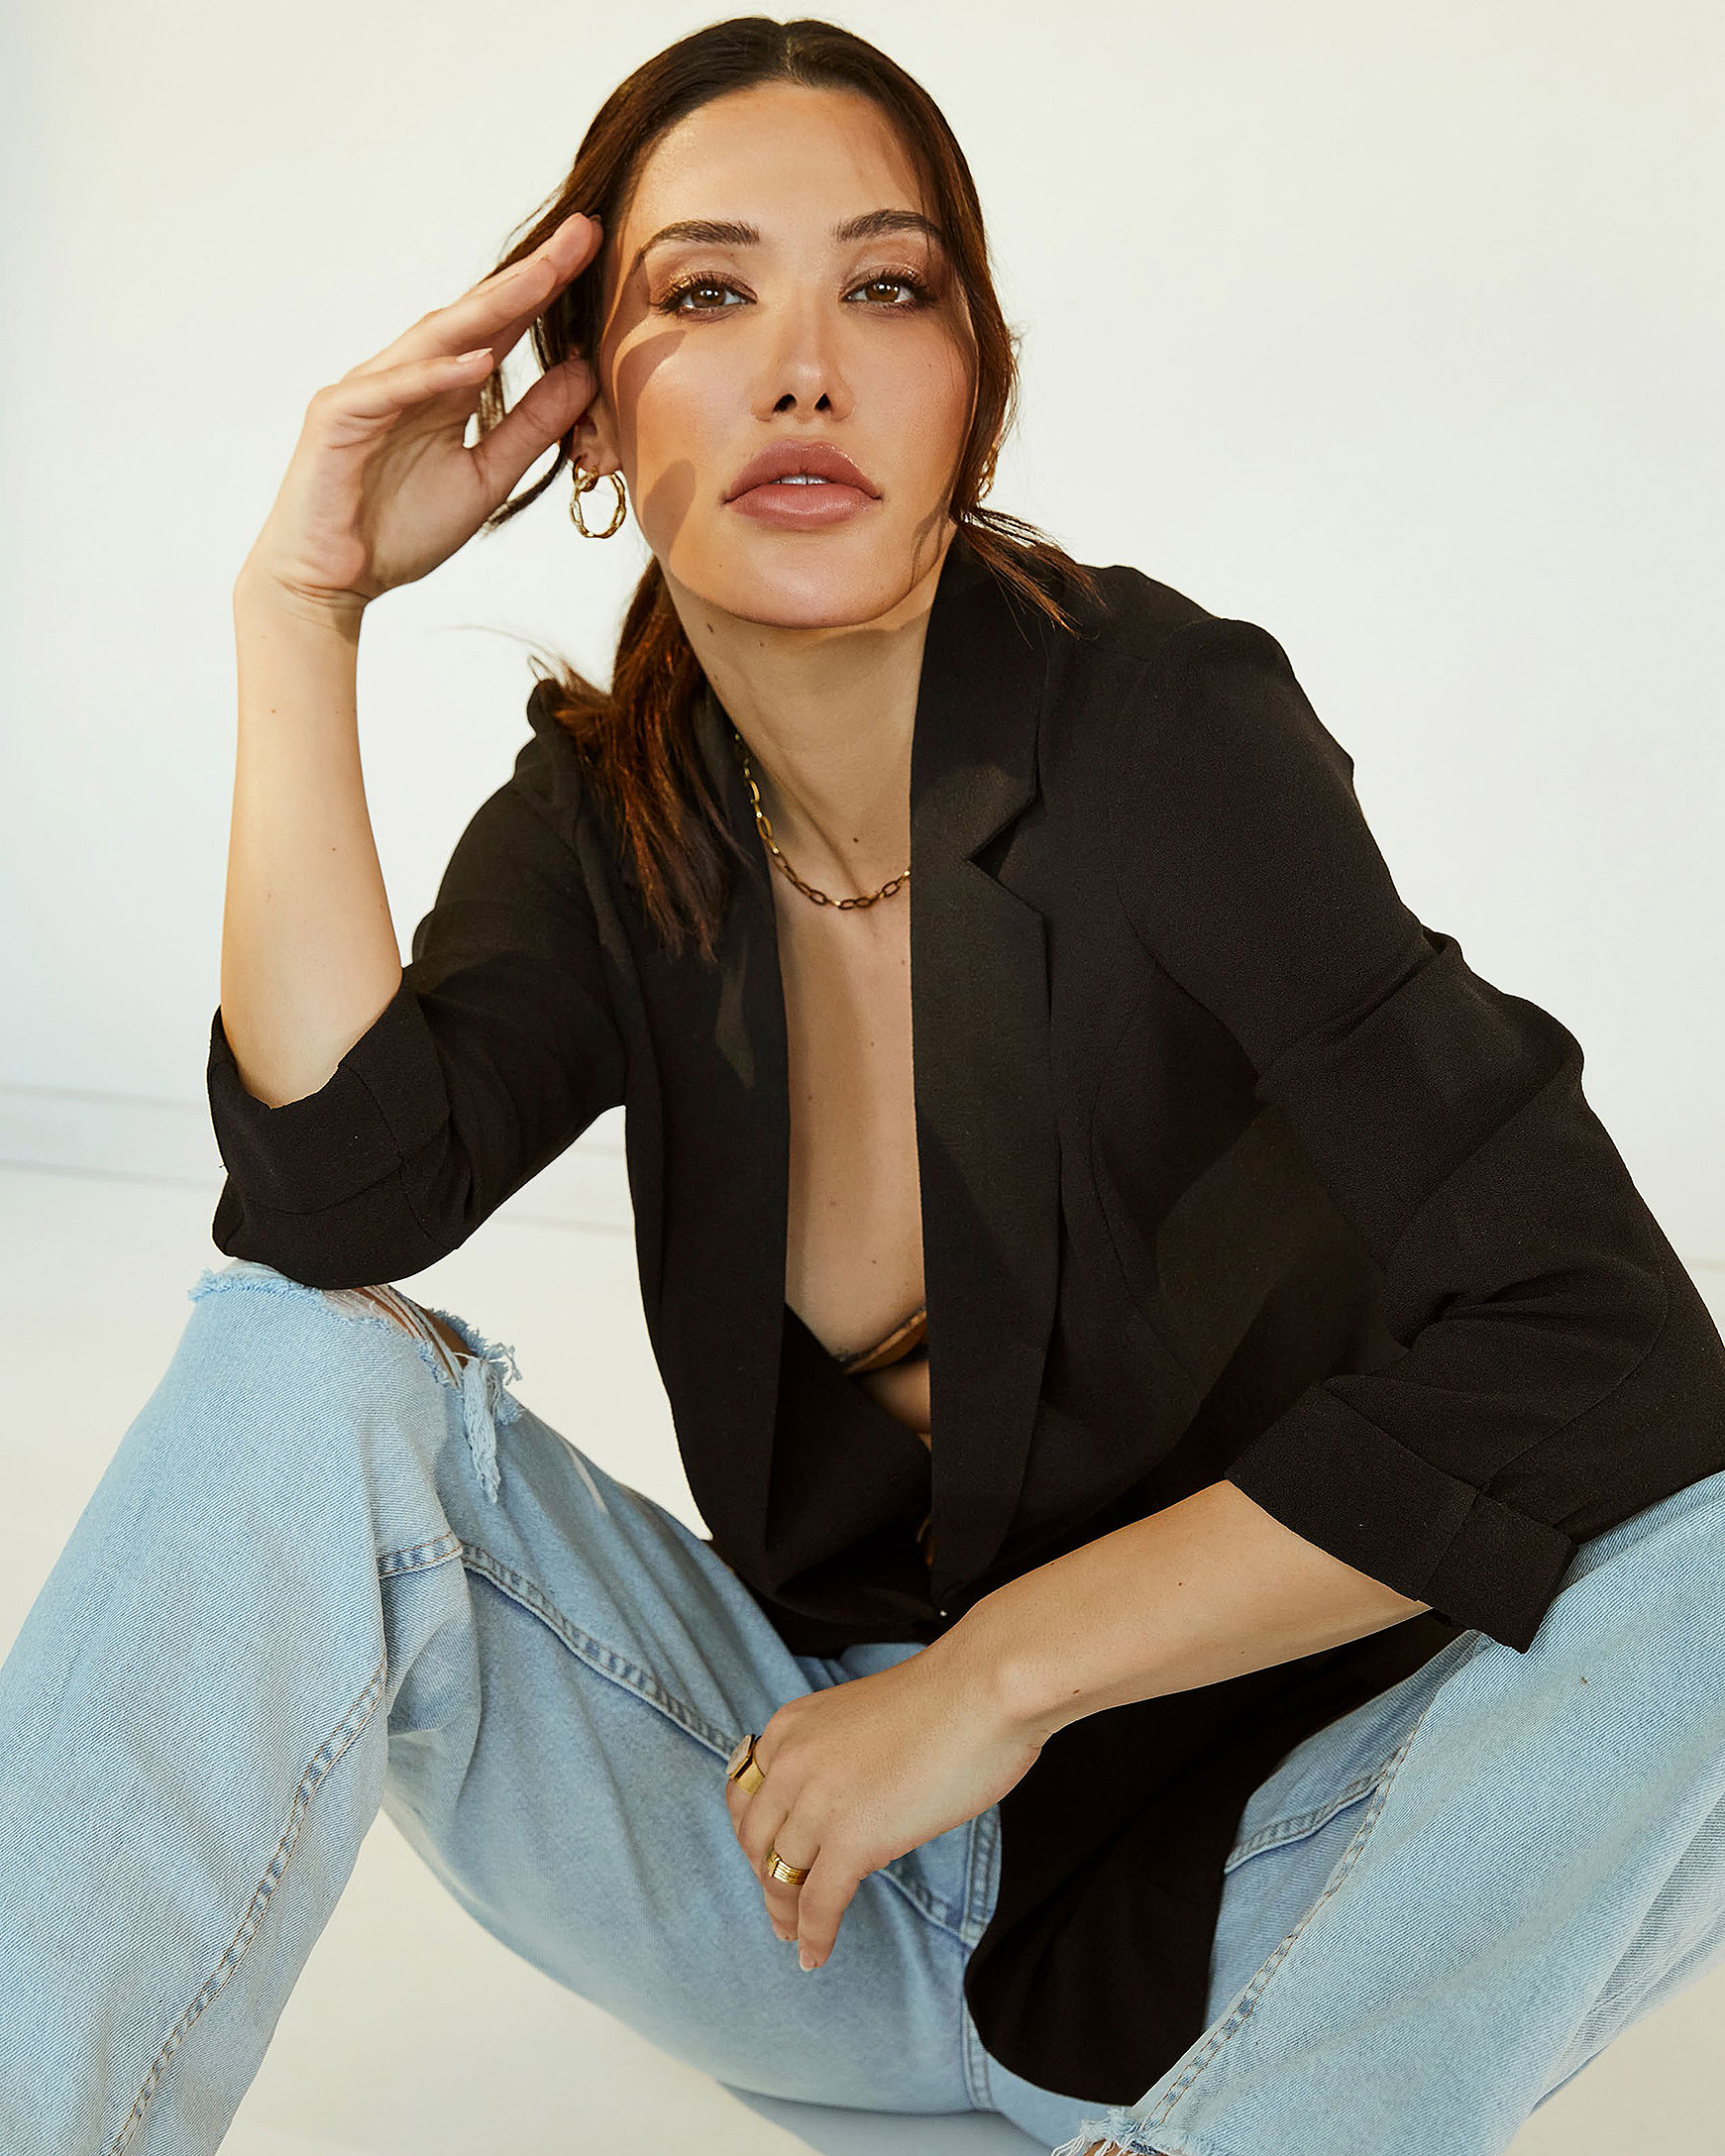 A female model sits on the ground in denim and a black jacket